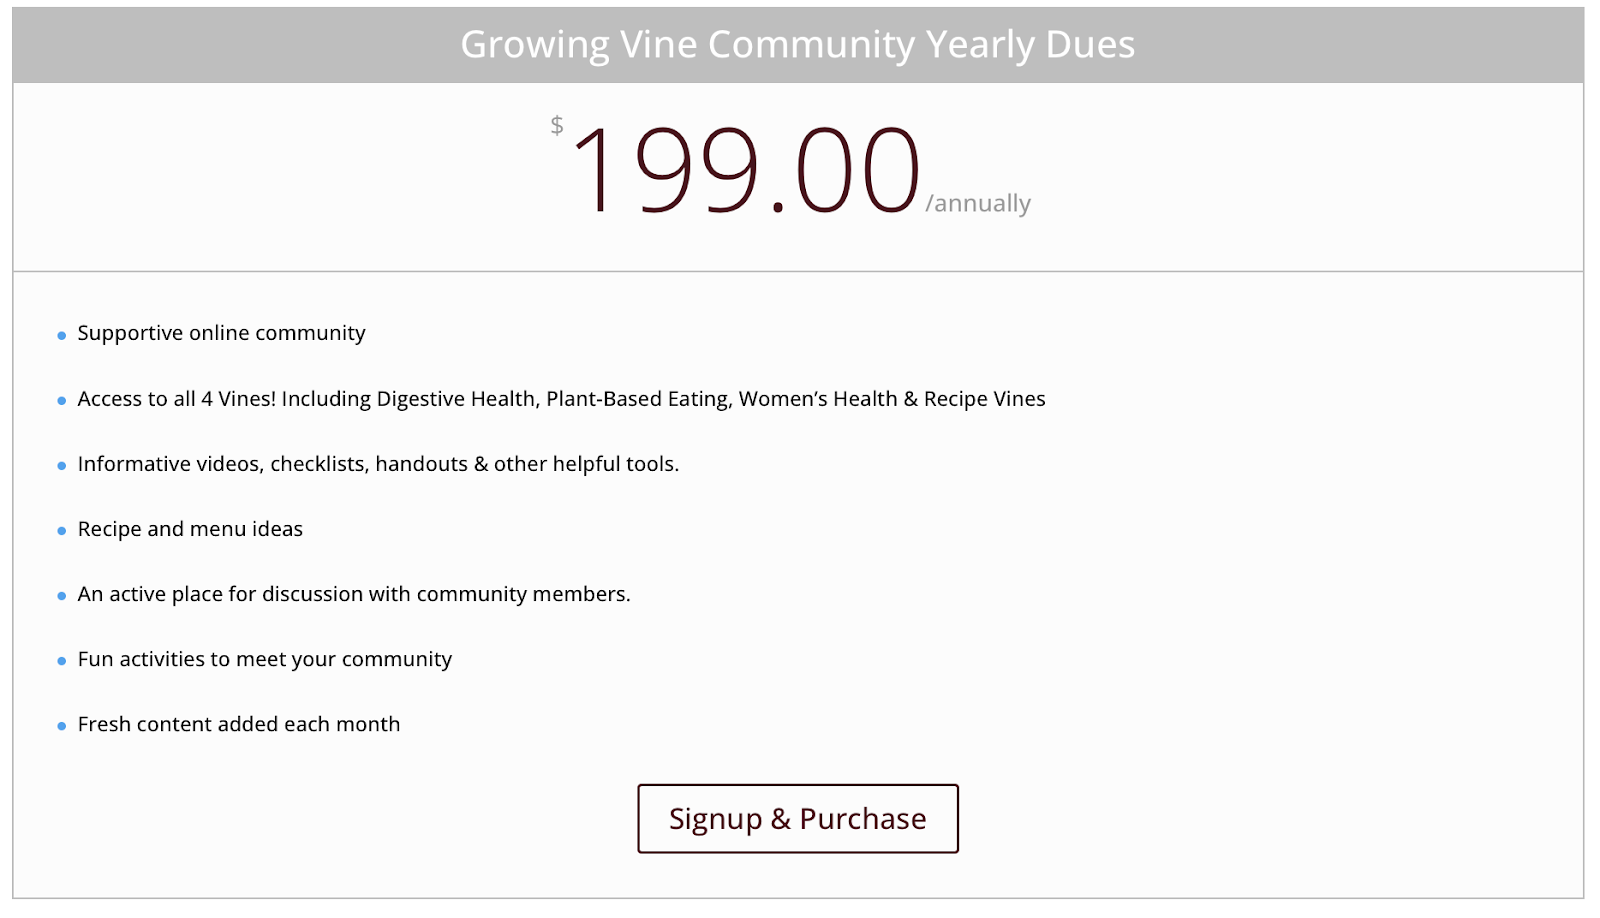 growing vine community yearly dues with benefits and signup button 